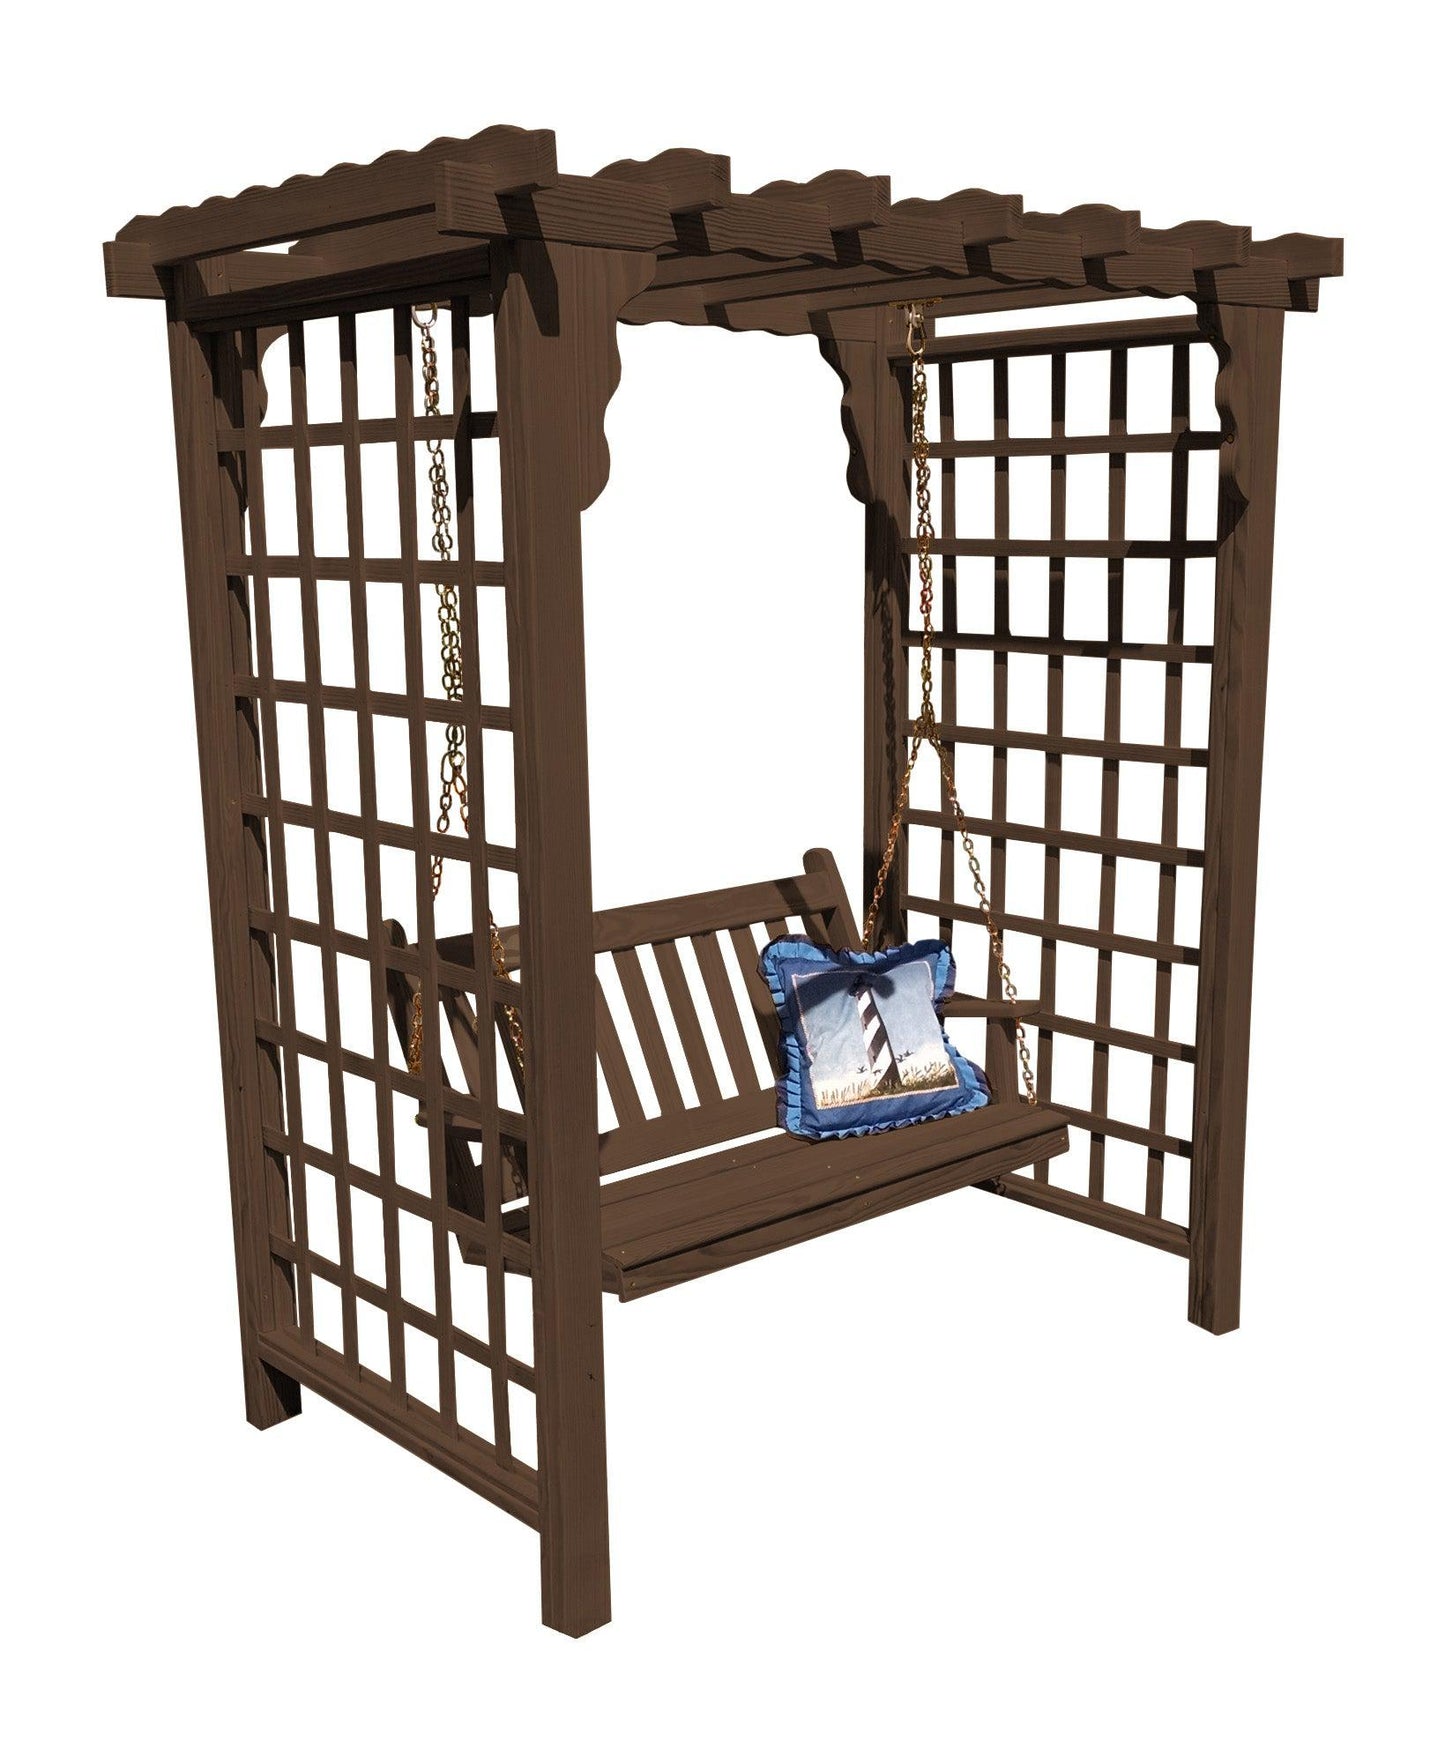 A&L FURNITURE CO. 6' Covington Pressure Treated Pine Arbor & Swing - LEAD TIME TO SHIP 10 BUSINESS DAYS